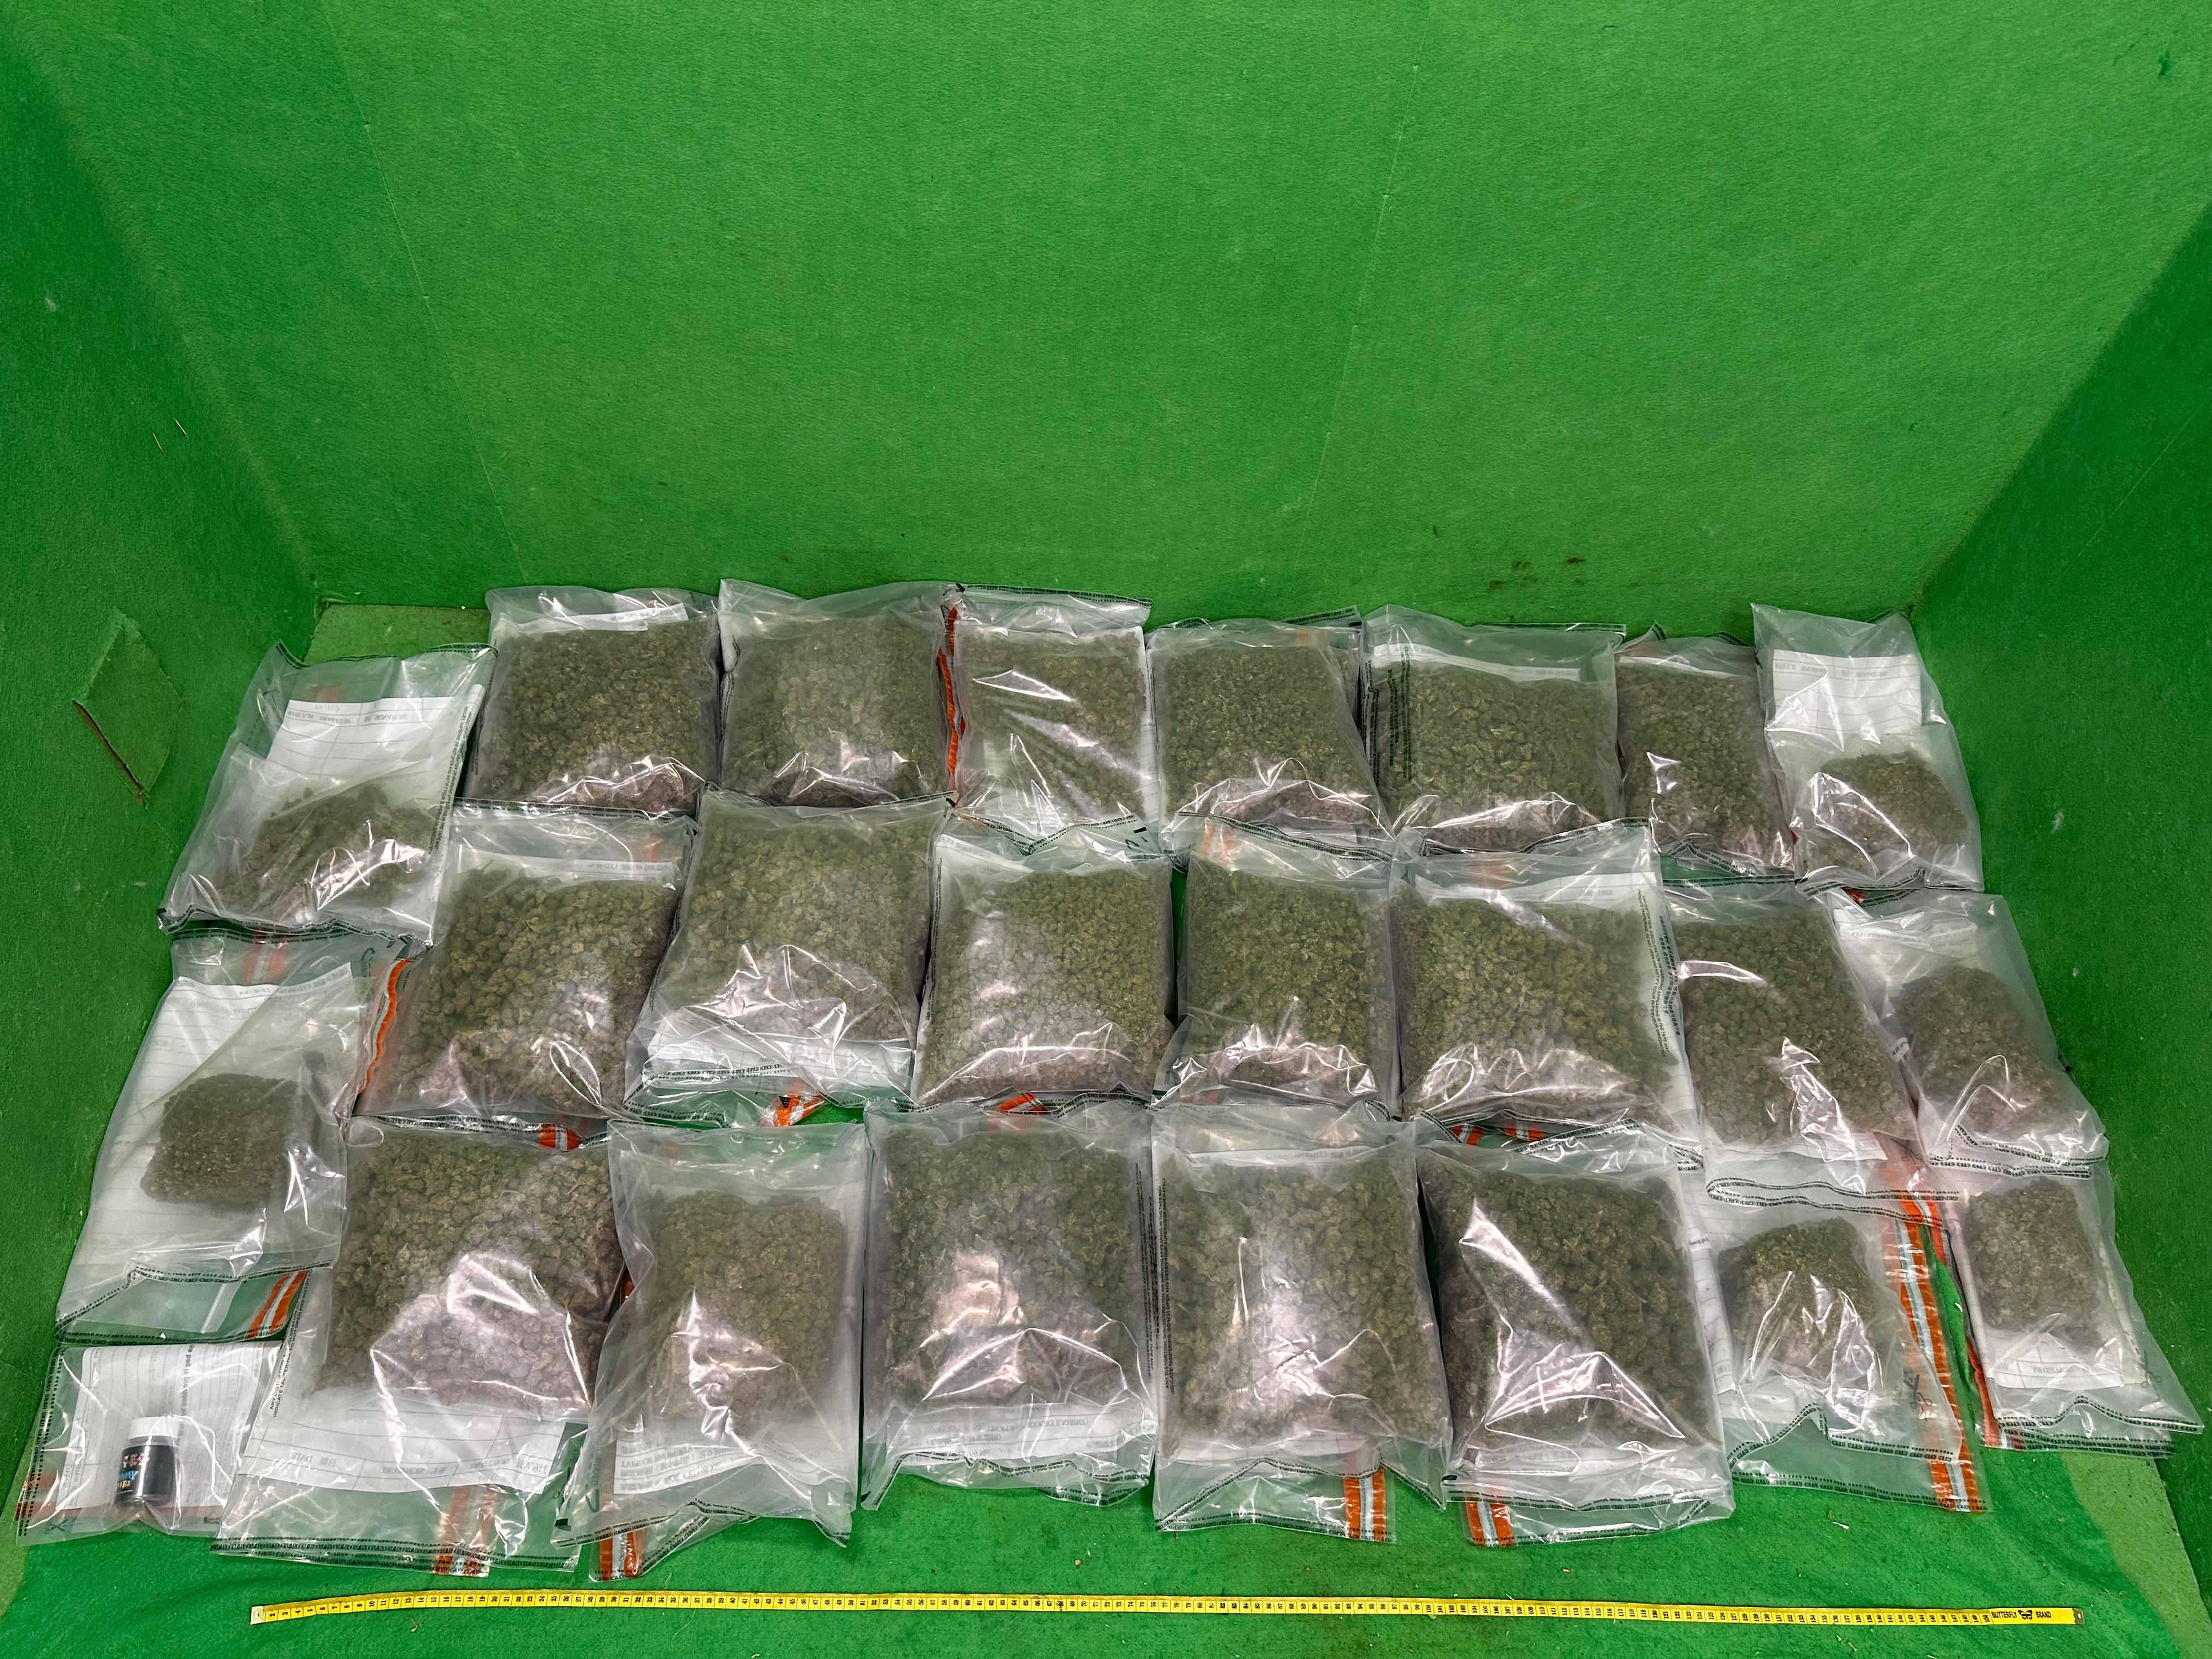 Hong Kong Customs today (April  26) seized about 22.3 kilograms of suspected cannabis buds and about 25 grams of suspected THC gummies with an estimated market value of about $4.7 million at Hong Kong International Airport. Photo shows the suspected cannabis buds and suspected THC gummies seized.